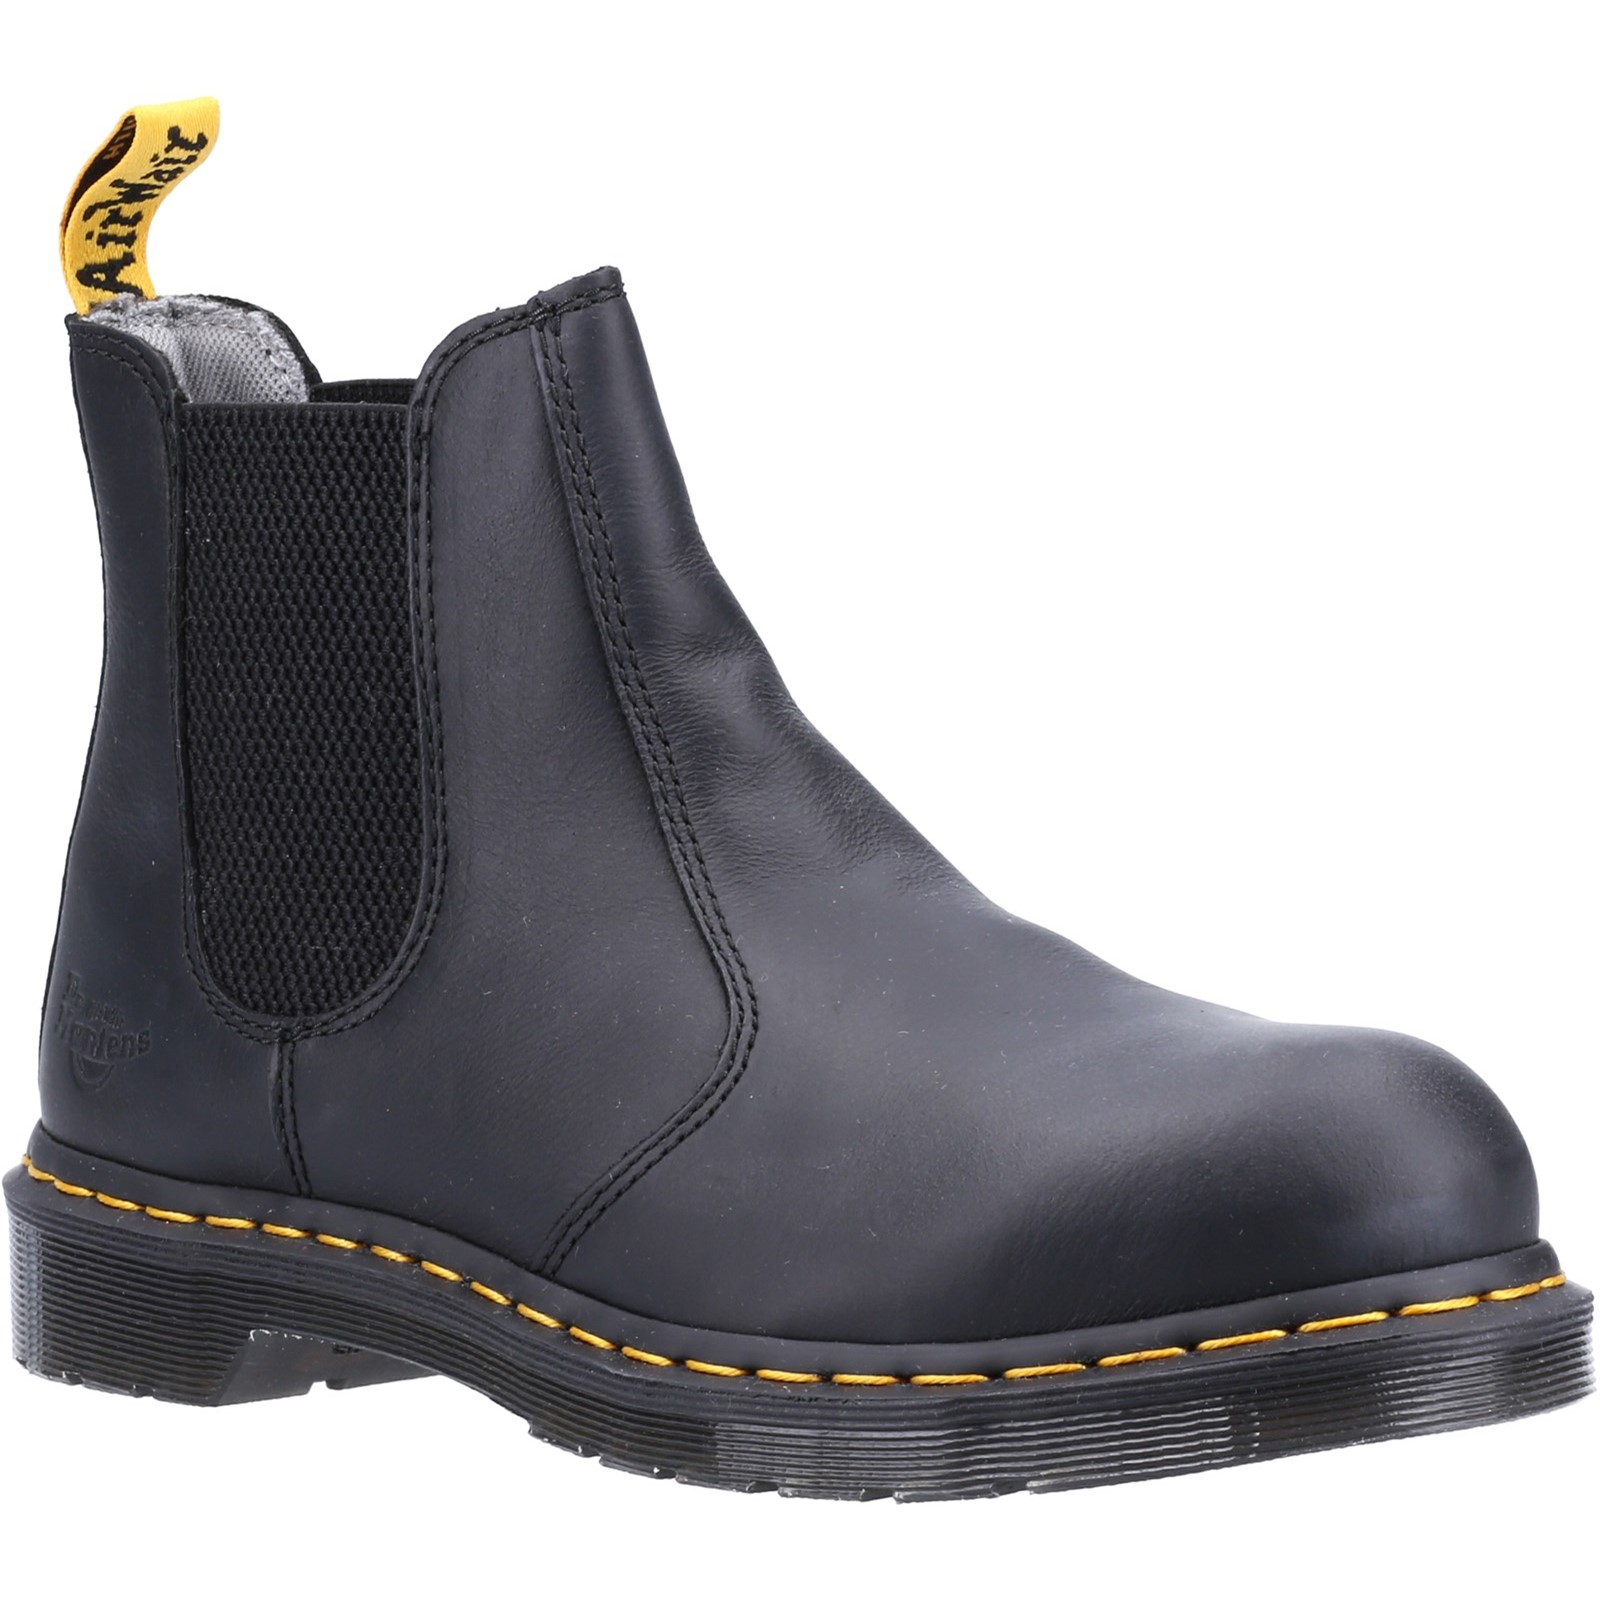 Arbor ST Elasticated Safety Boot